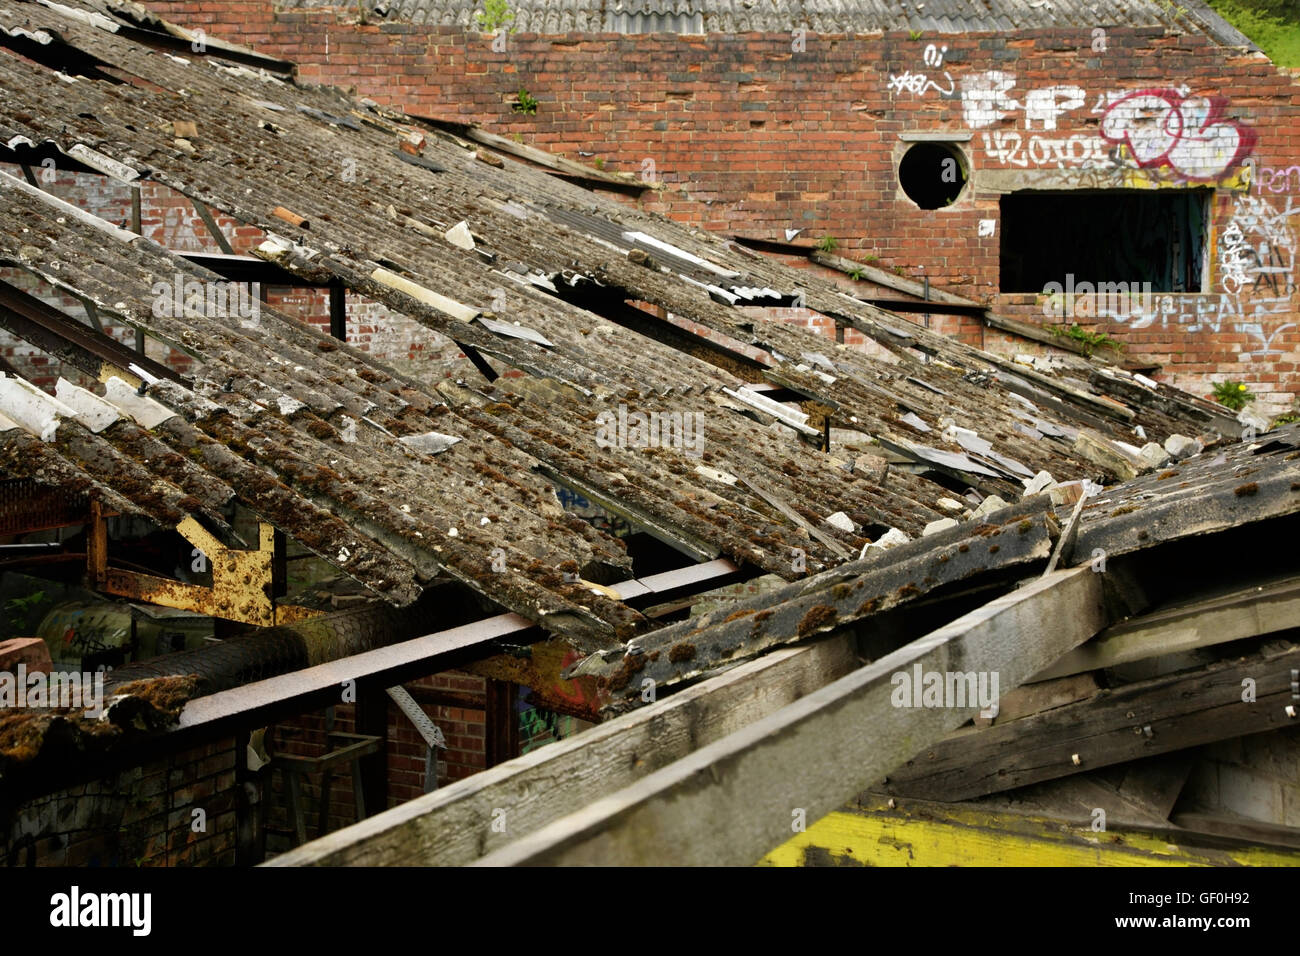 Damaged corrugated asbestos roofing on abandoned industrial building. Stock Photo